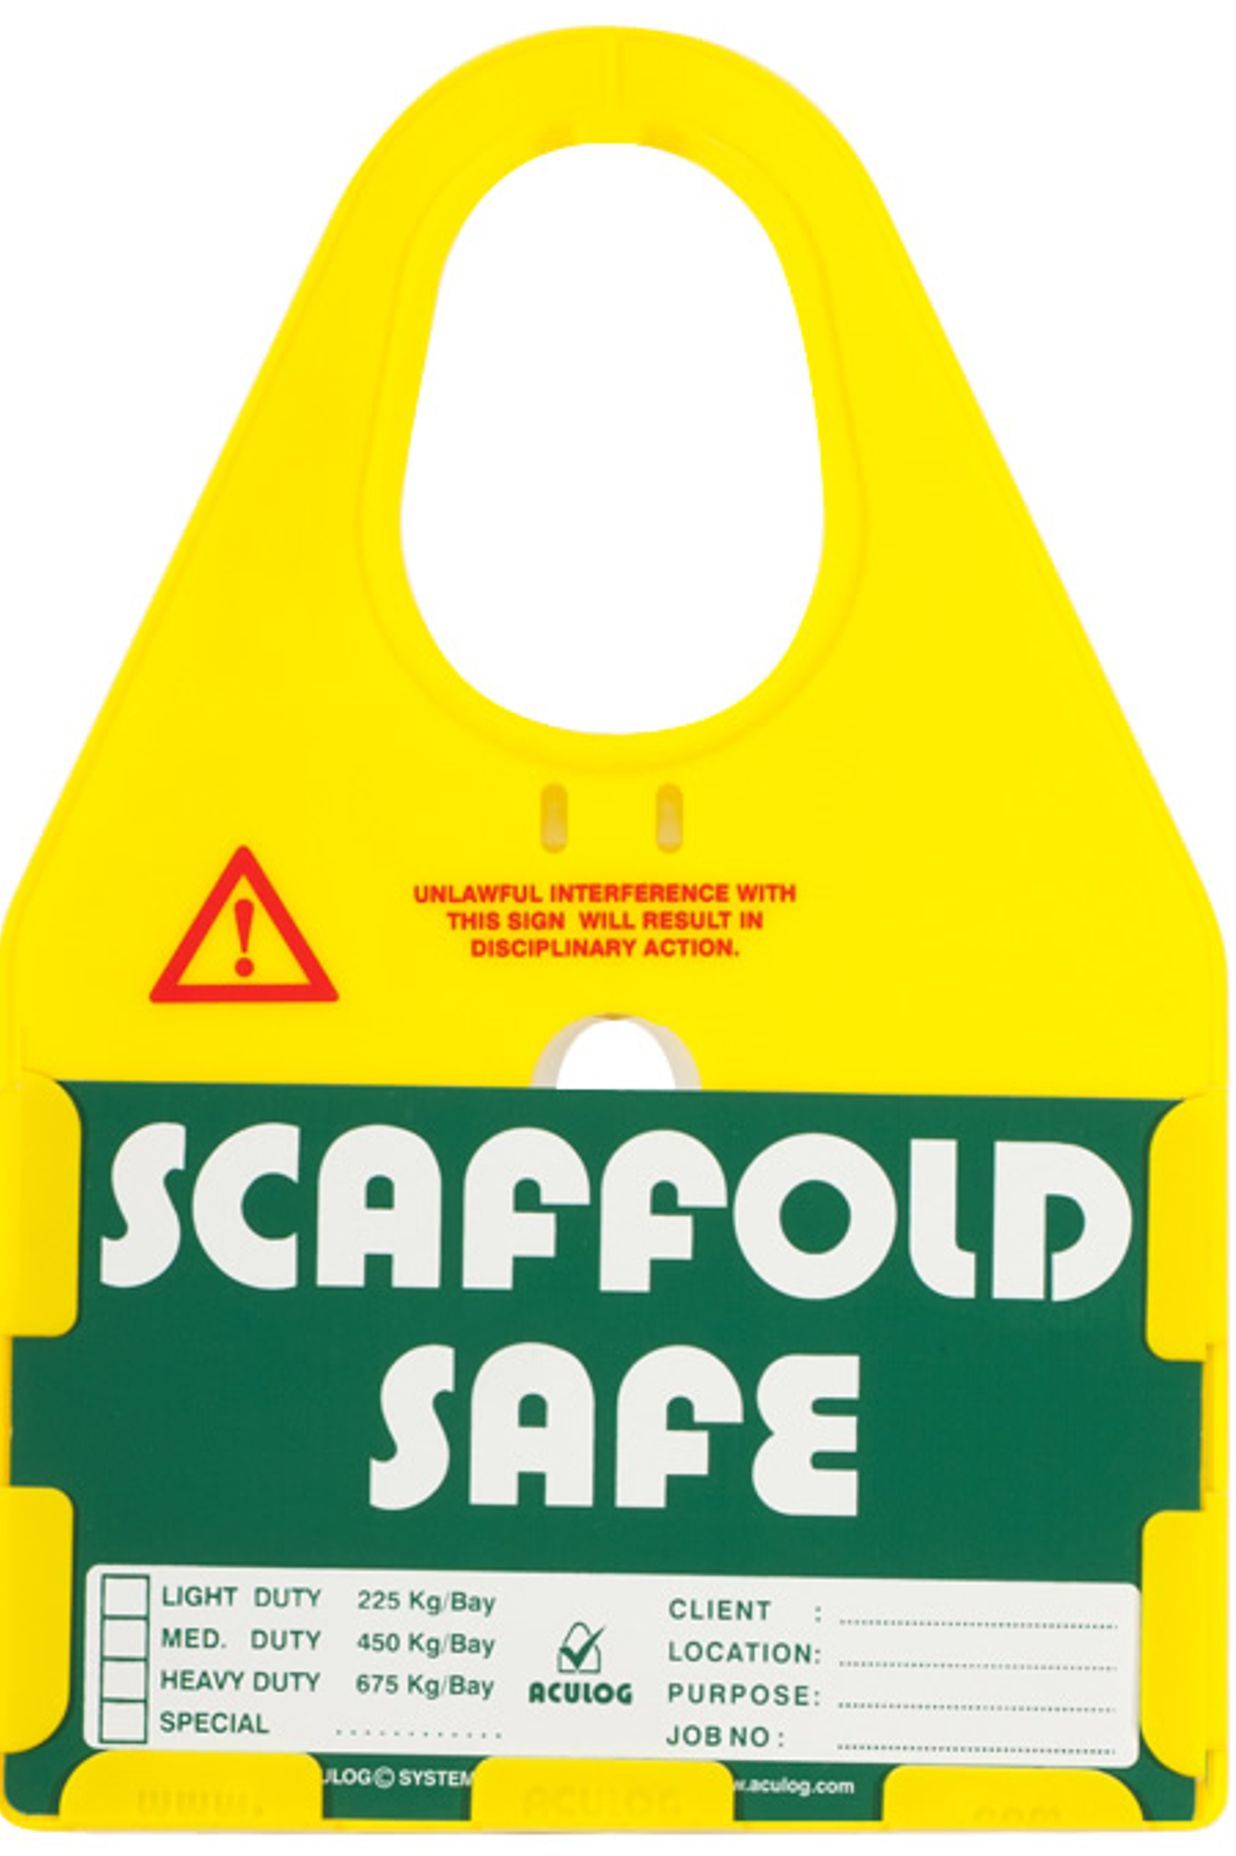 Aculog safe scaffold tag with insertable card that Peninsula Scaffolding uses, recording weekly safety check visits